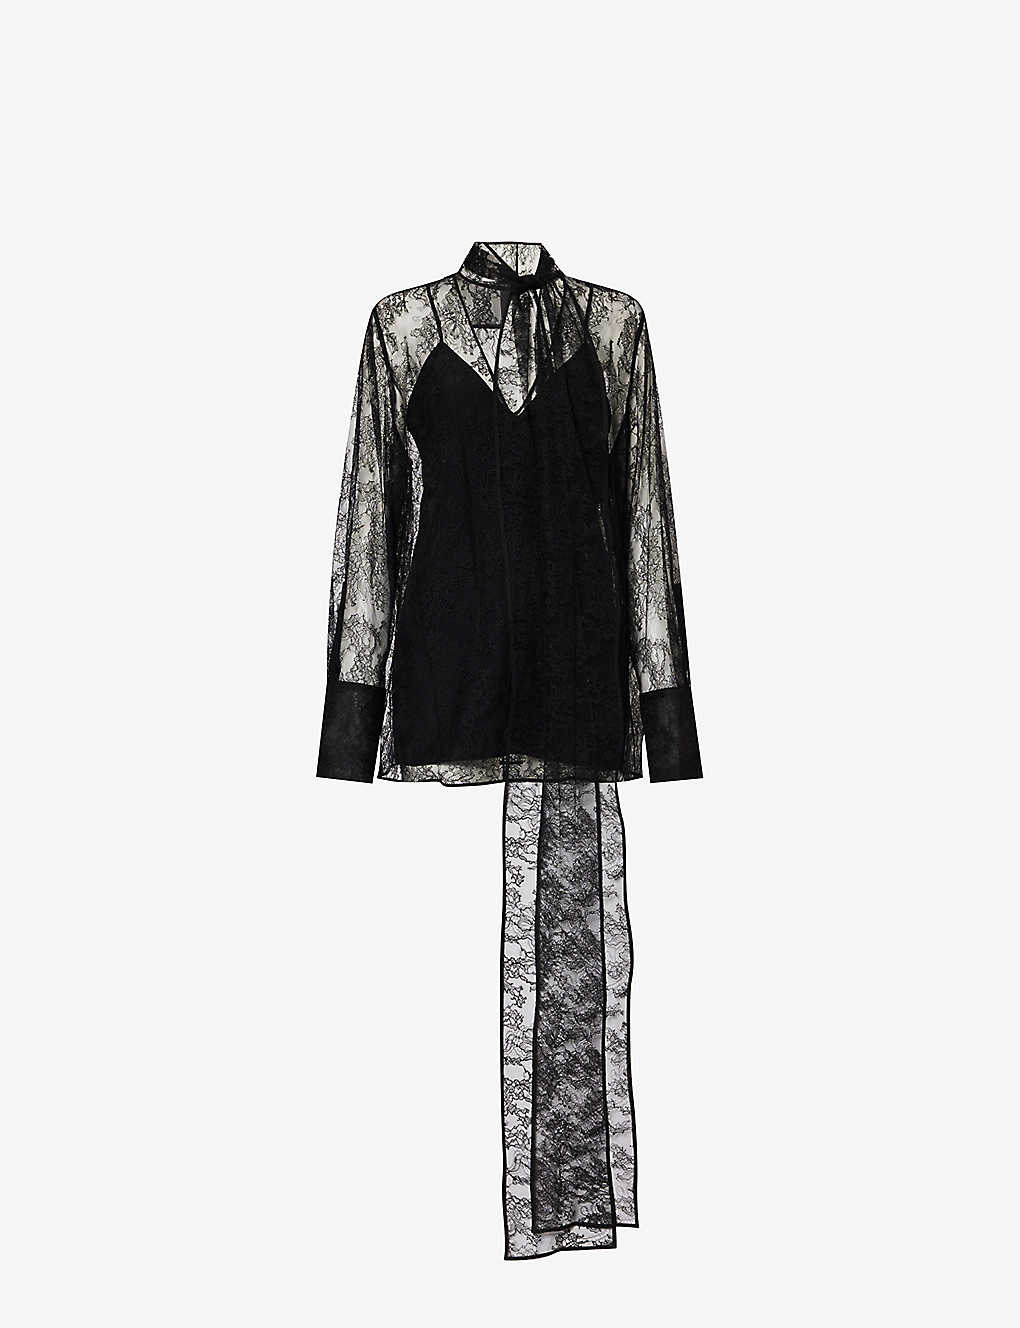 GIVENCHY GIVENCHY WOMEN'S BLACK LAVALLIERE SEMI-SHEER LACE BLOUSE